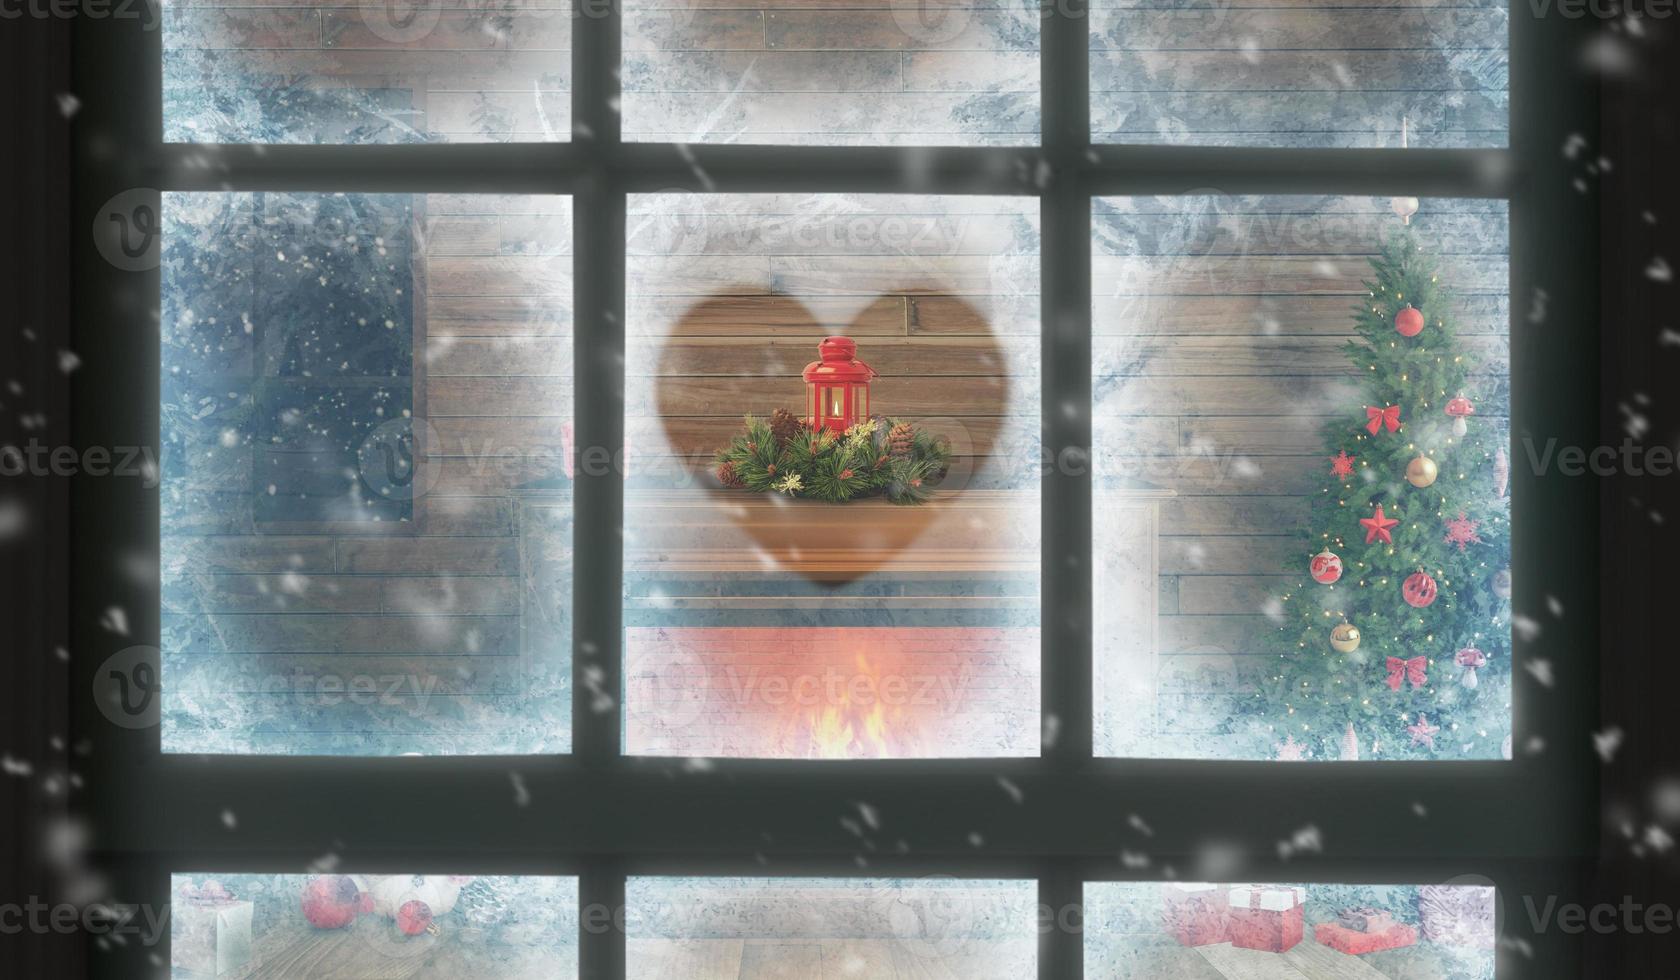 View through the window of the interior of the home at Christmas time. A heart painted on the window frost. Inside is a fireplace with a Christmas tree, gifts and decorations photo